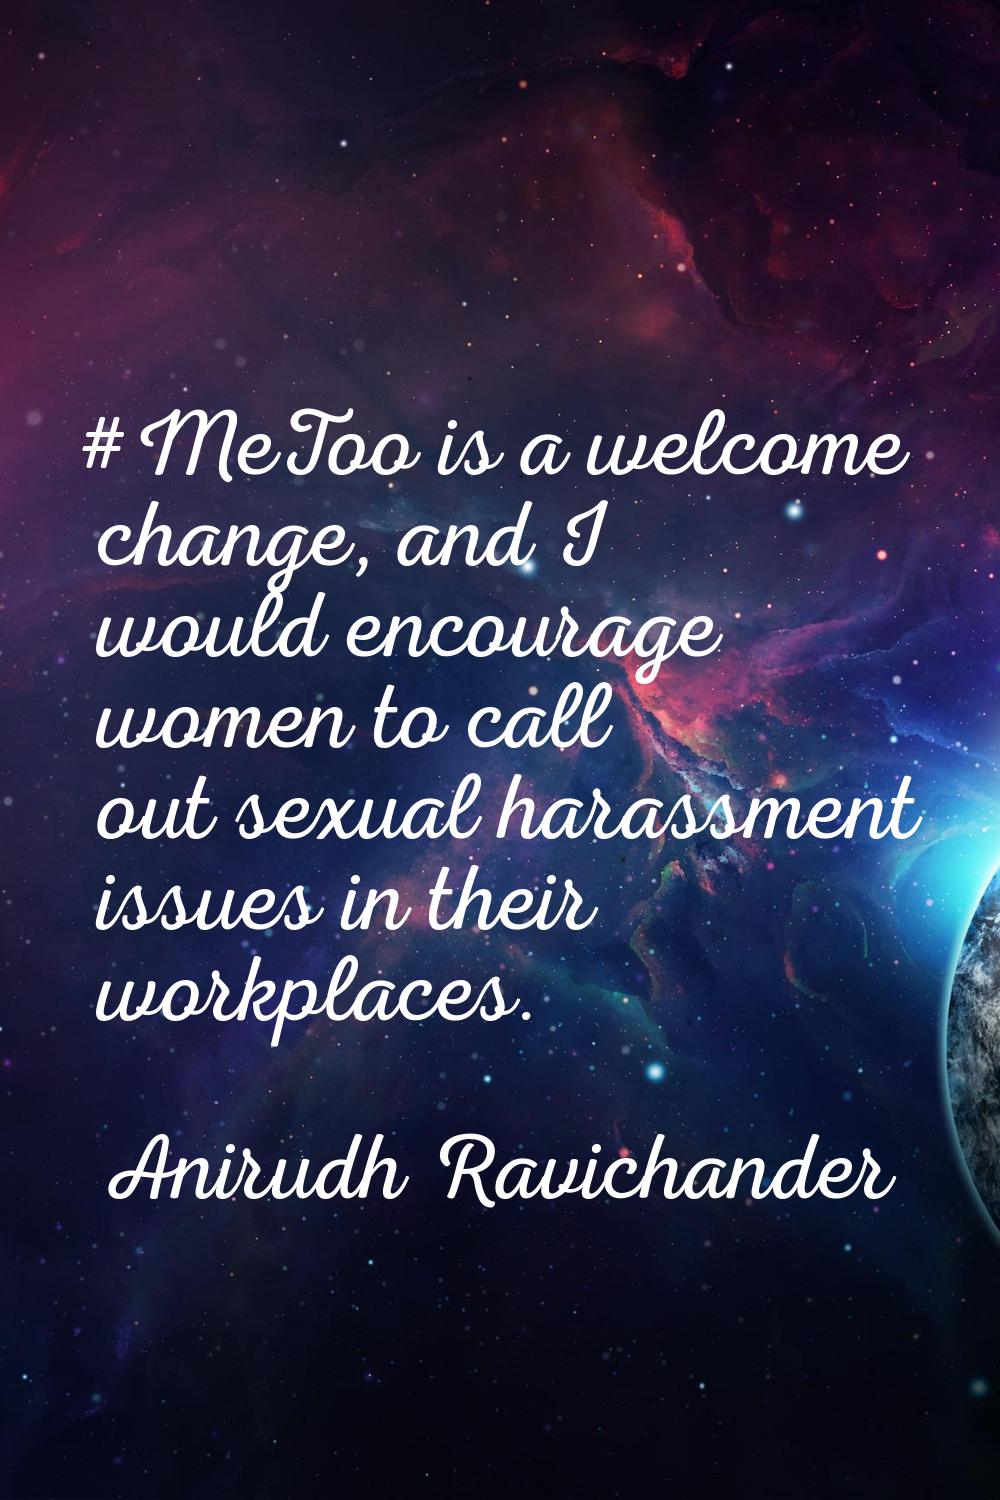 #MeToo is a welcome change, and I would encourage women to call out sexual harassment issues in the